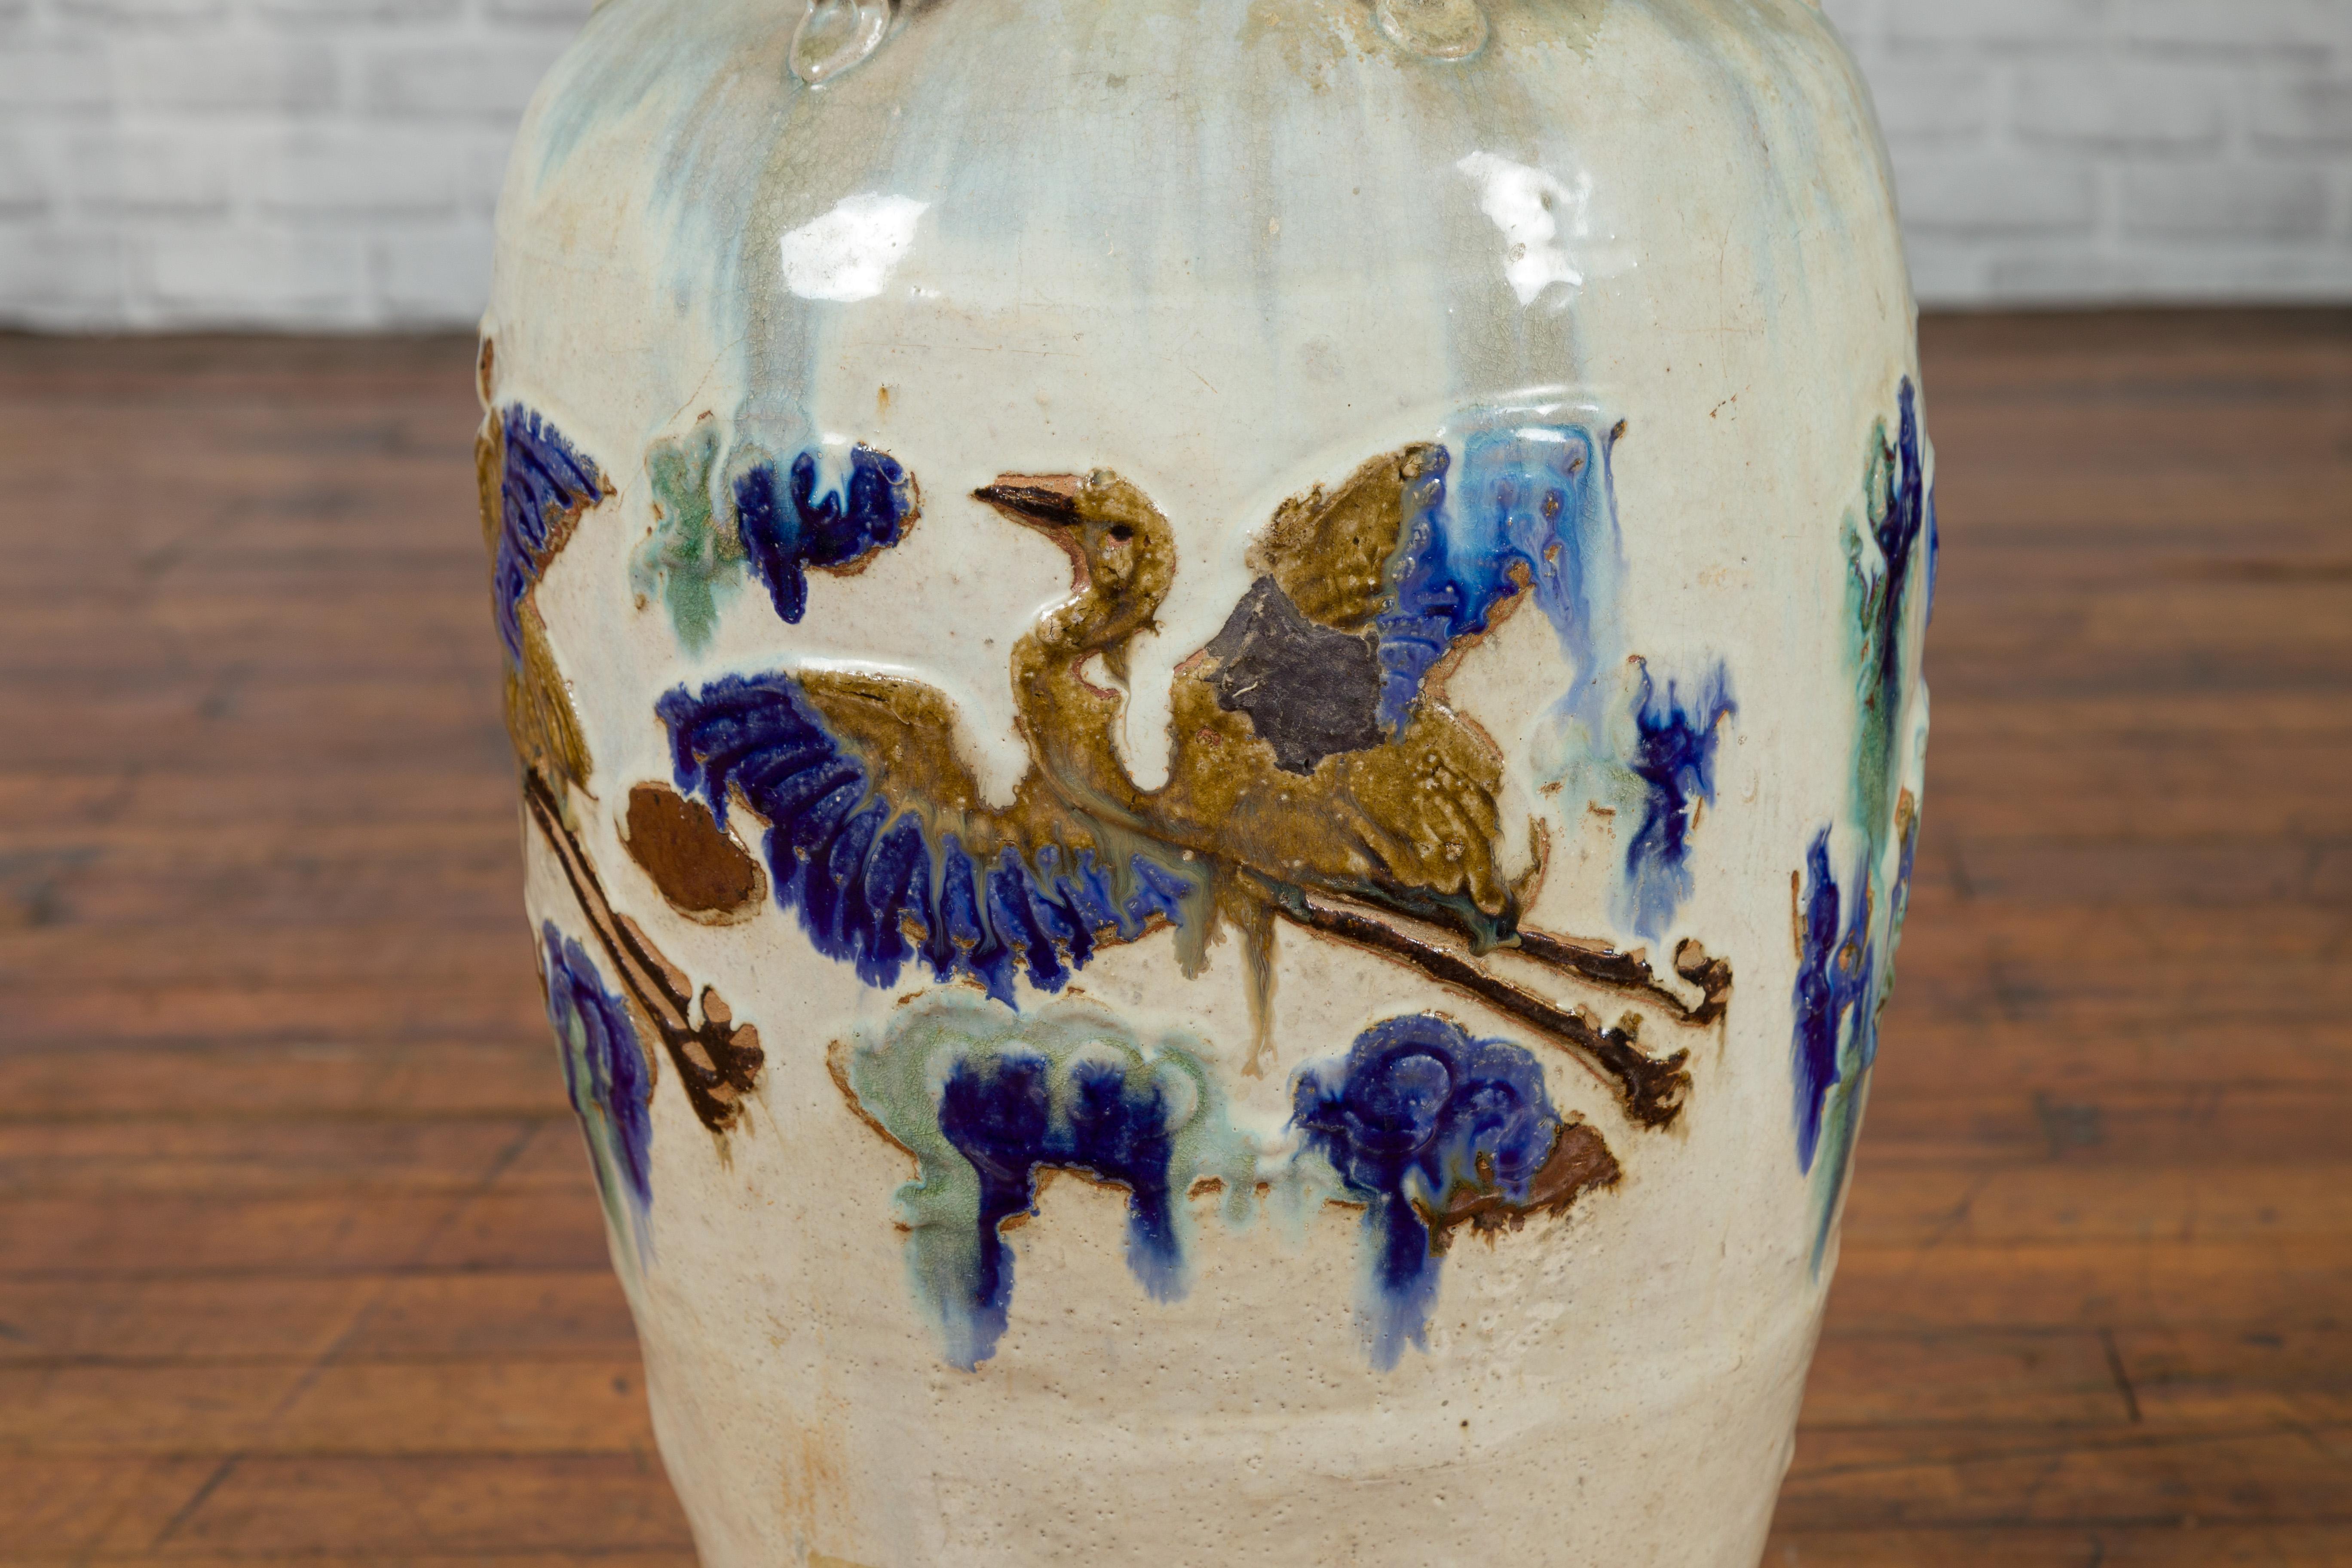 19th Century Martaban Vase with Blue, Green and Brown Bird Motifs and Loops 1